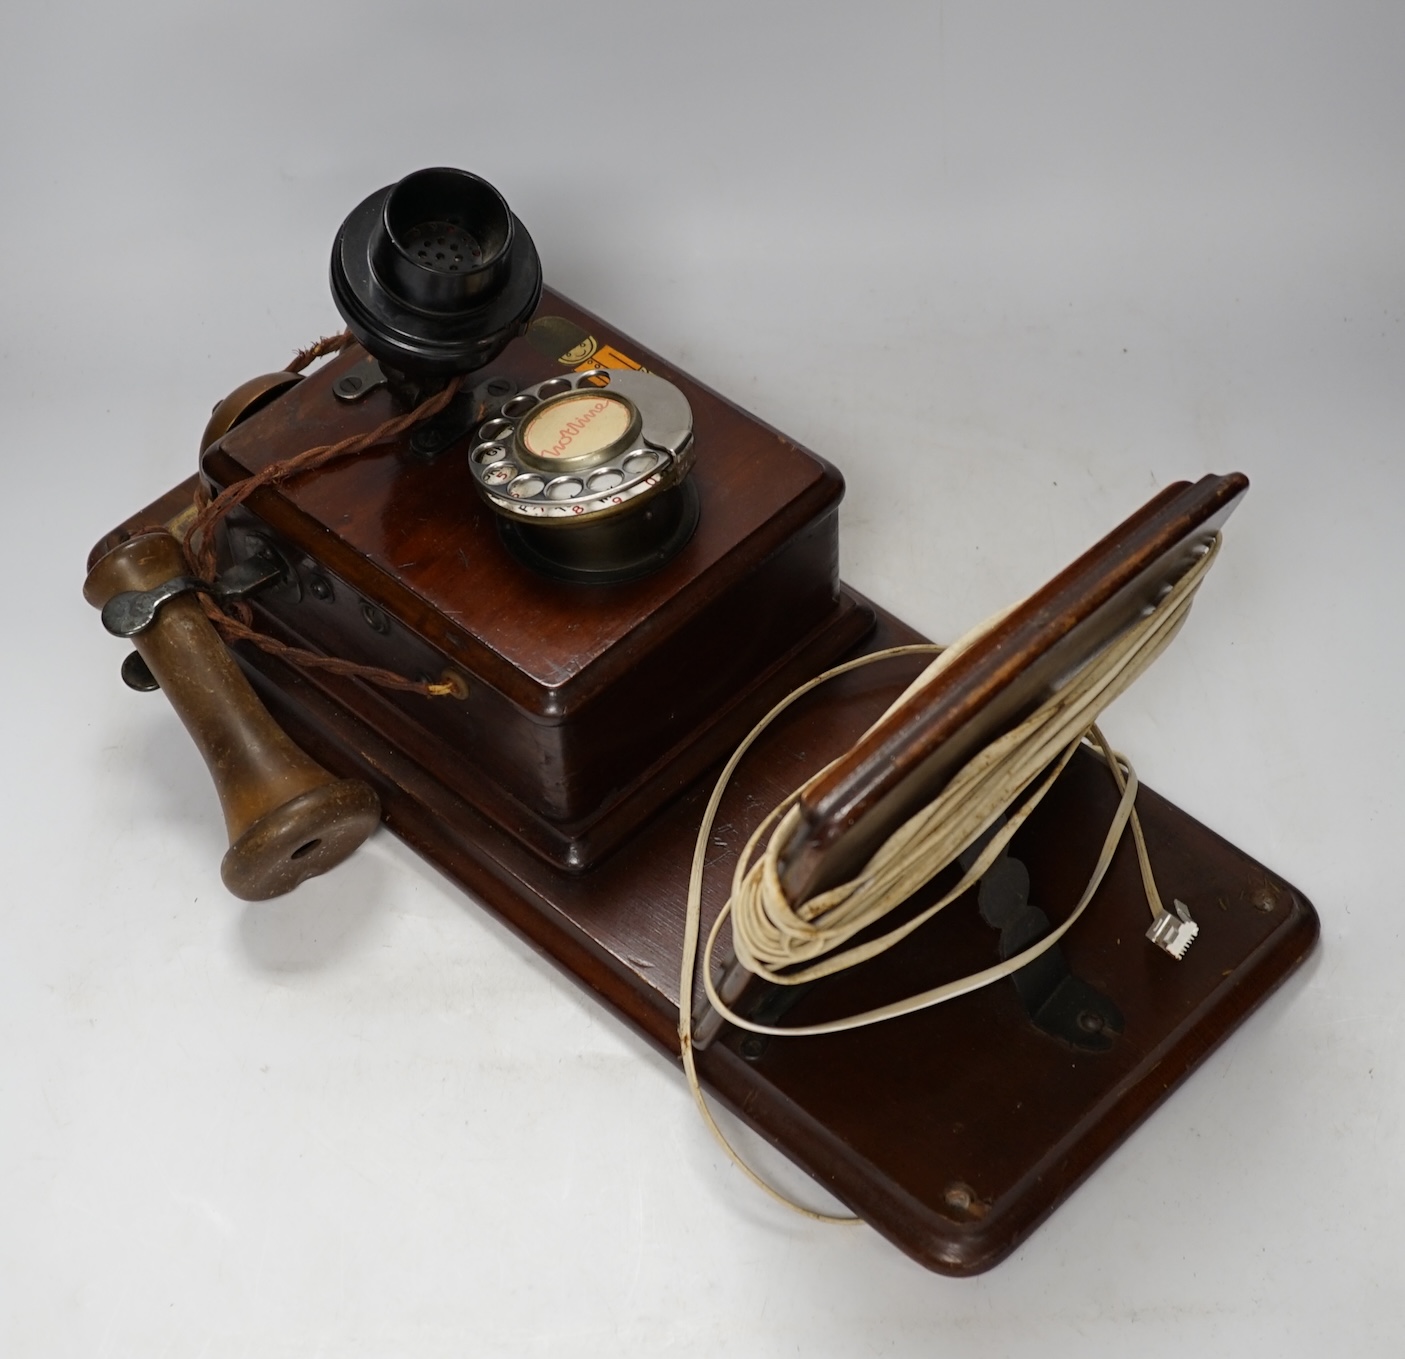 An early 20th century Hotline wall mounted telephone, 47cm long. Condition - fair